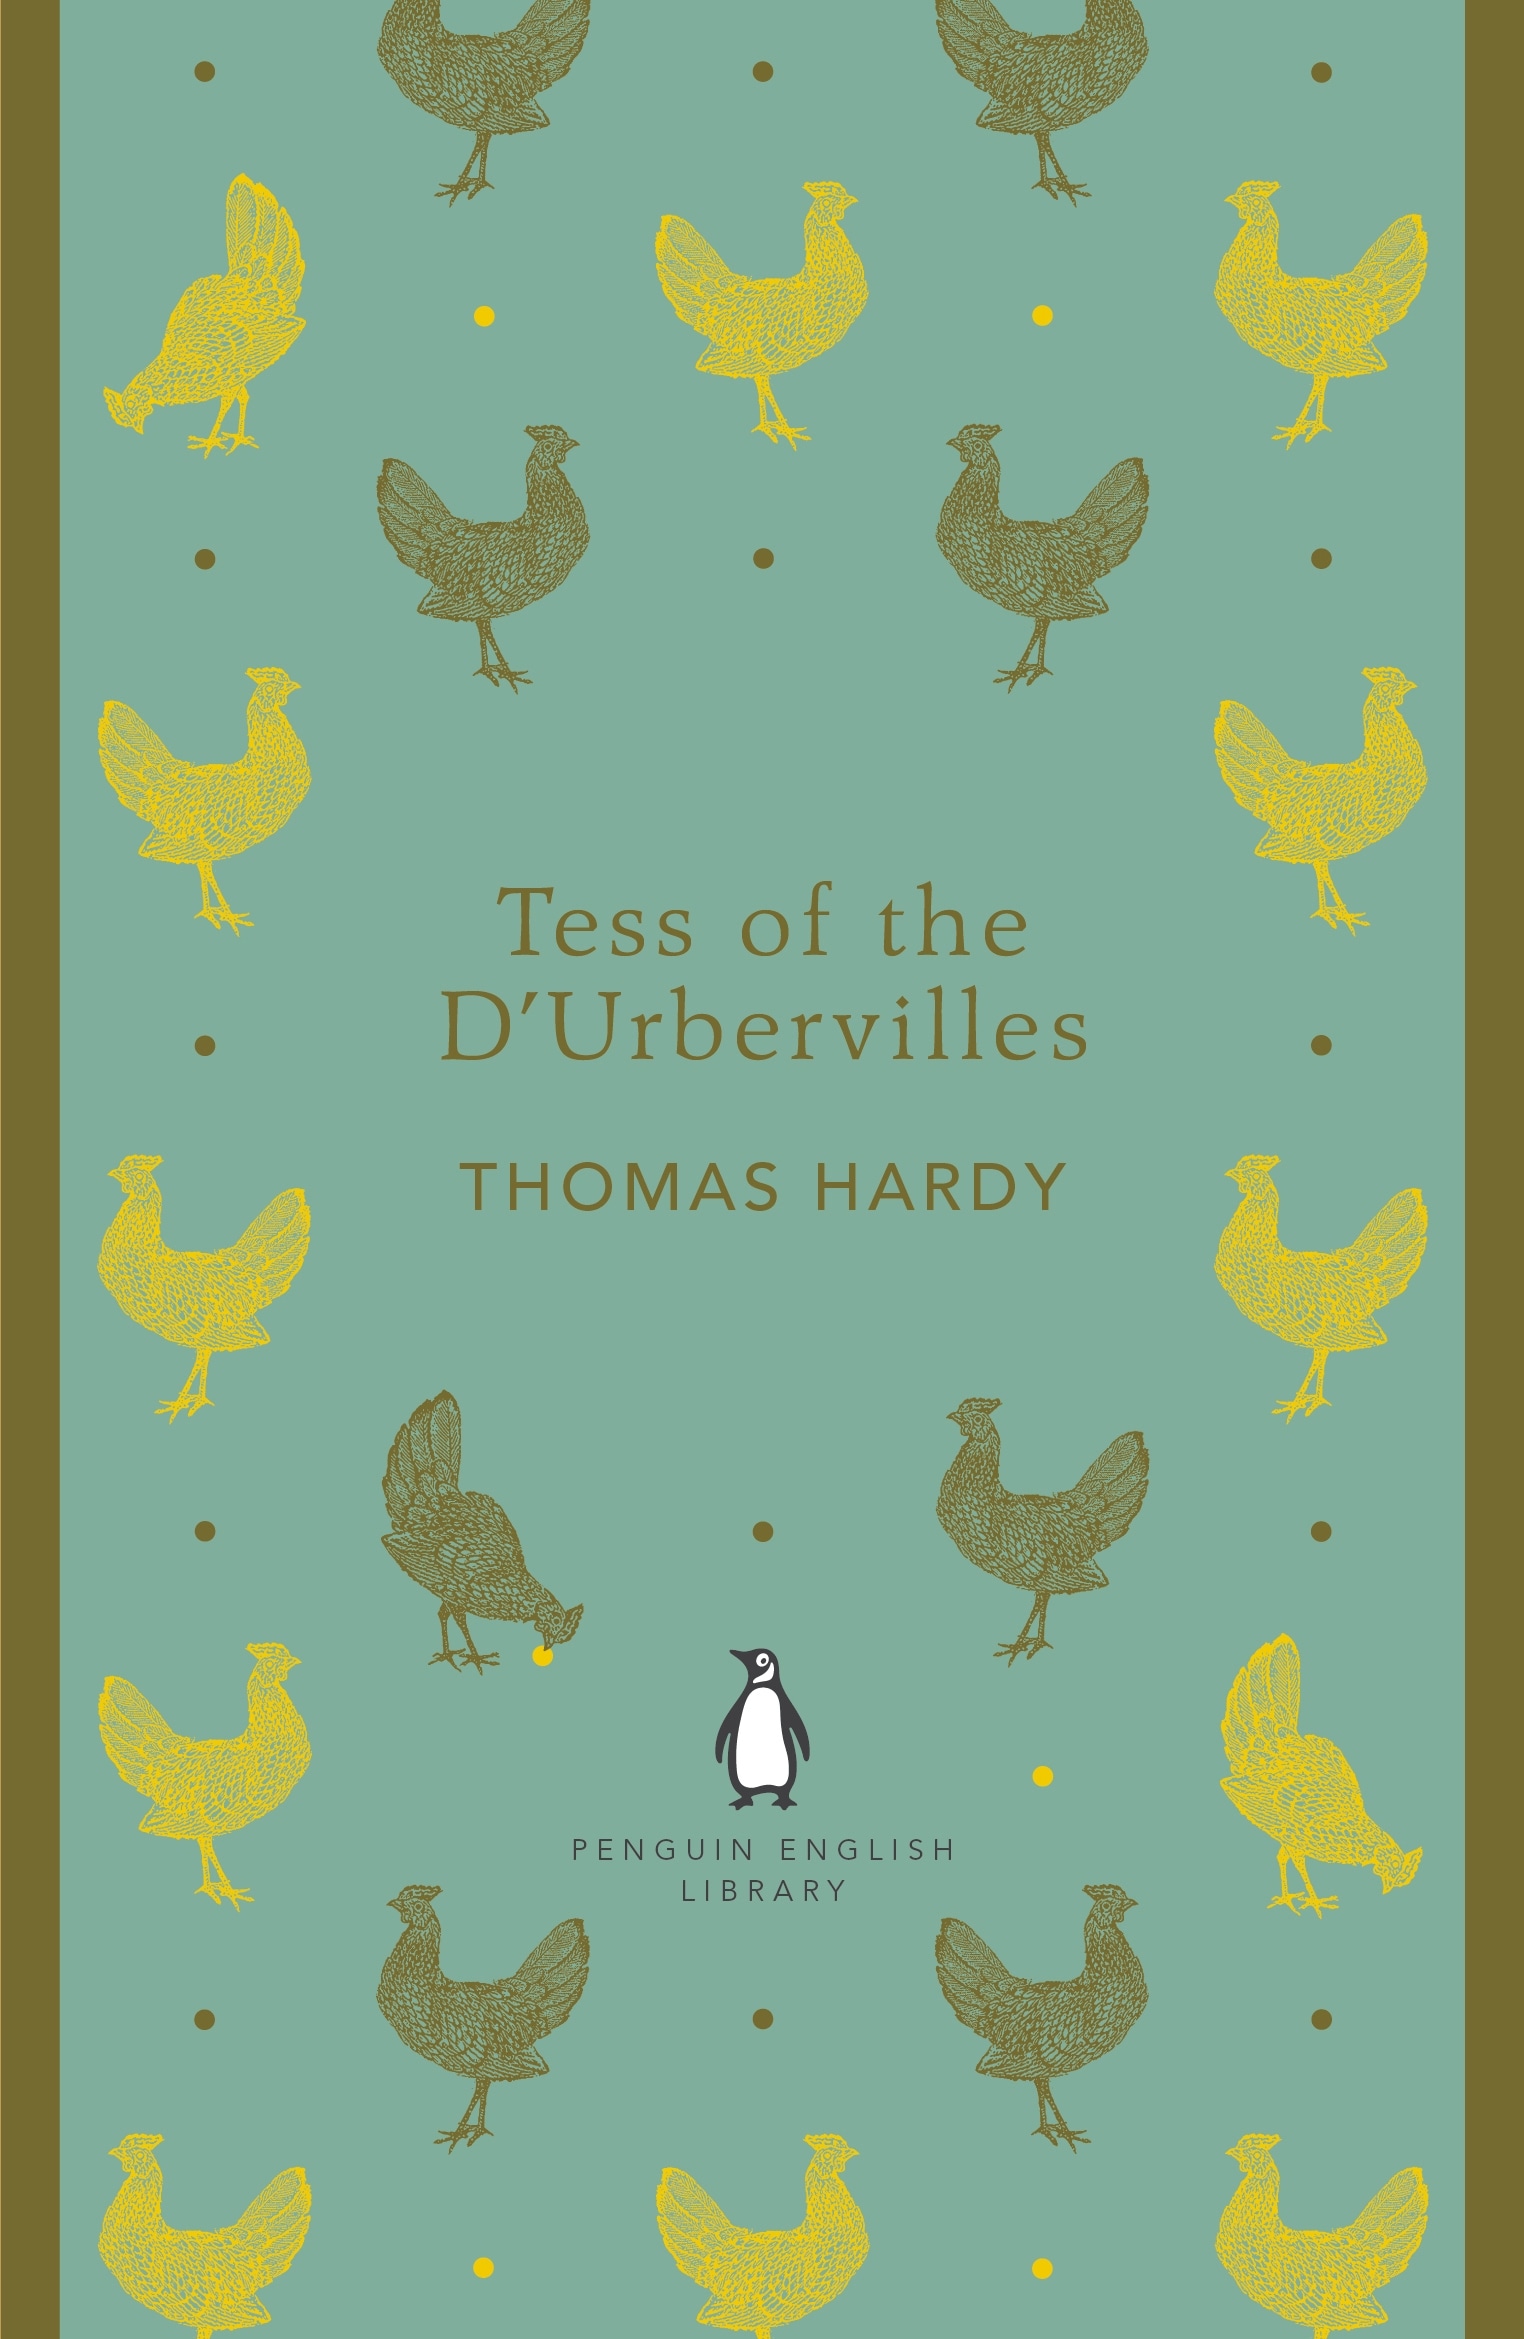 Book “Tess of the D'Urbervilles” by Thomas Hardy — October 25, 2012